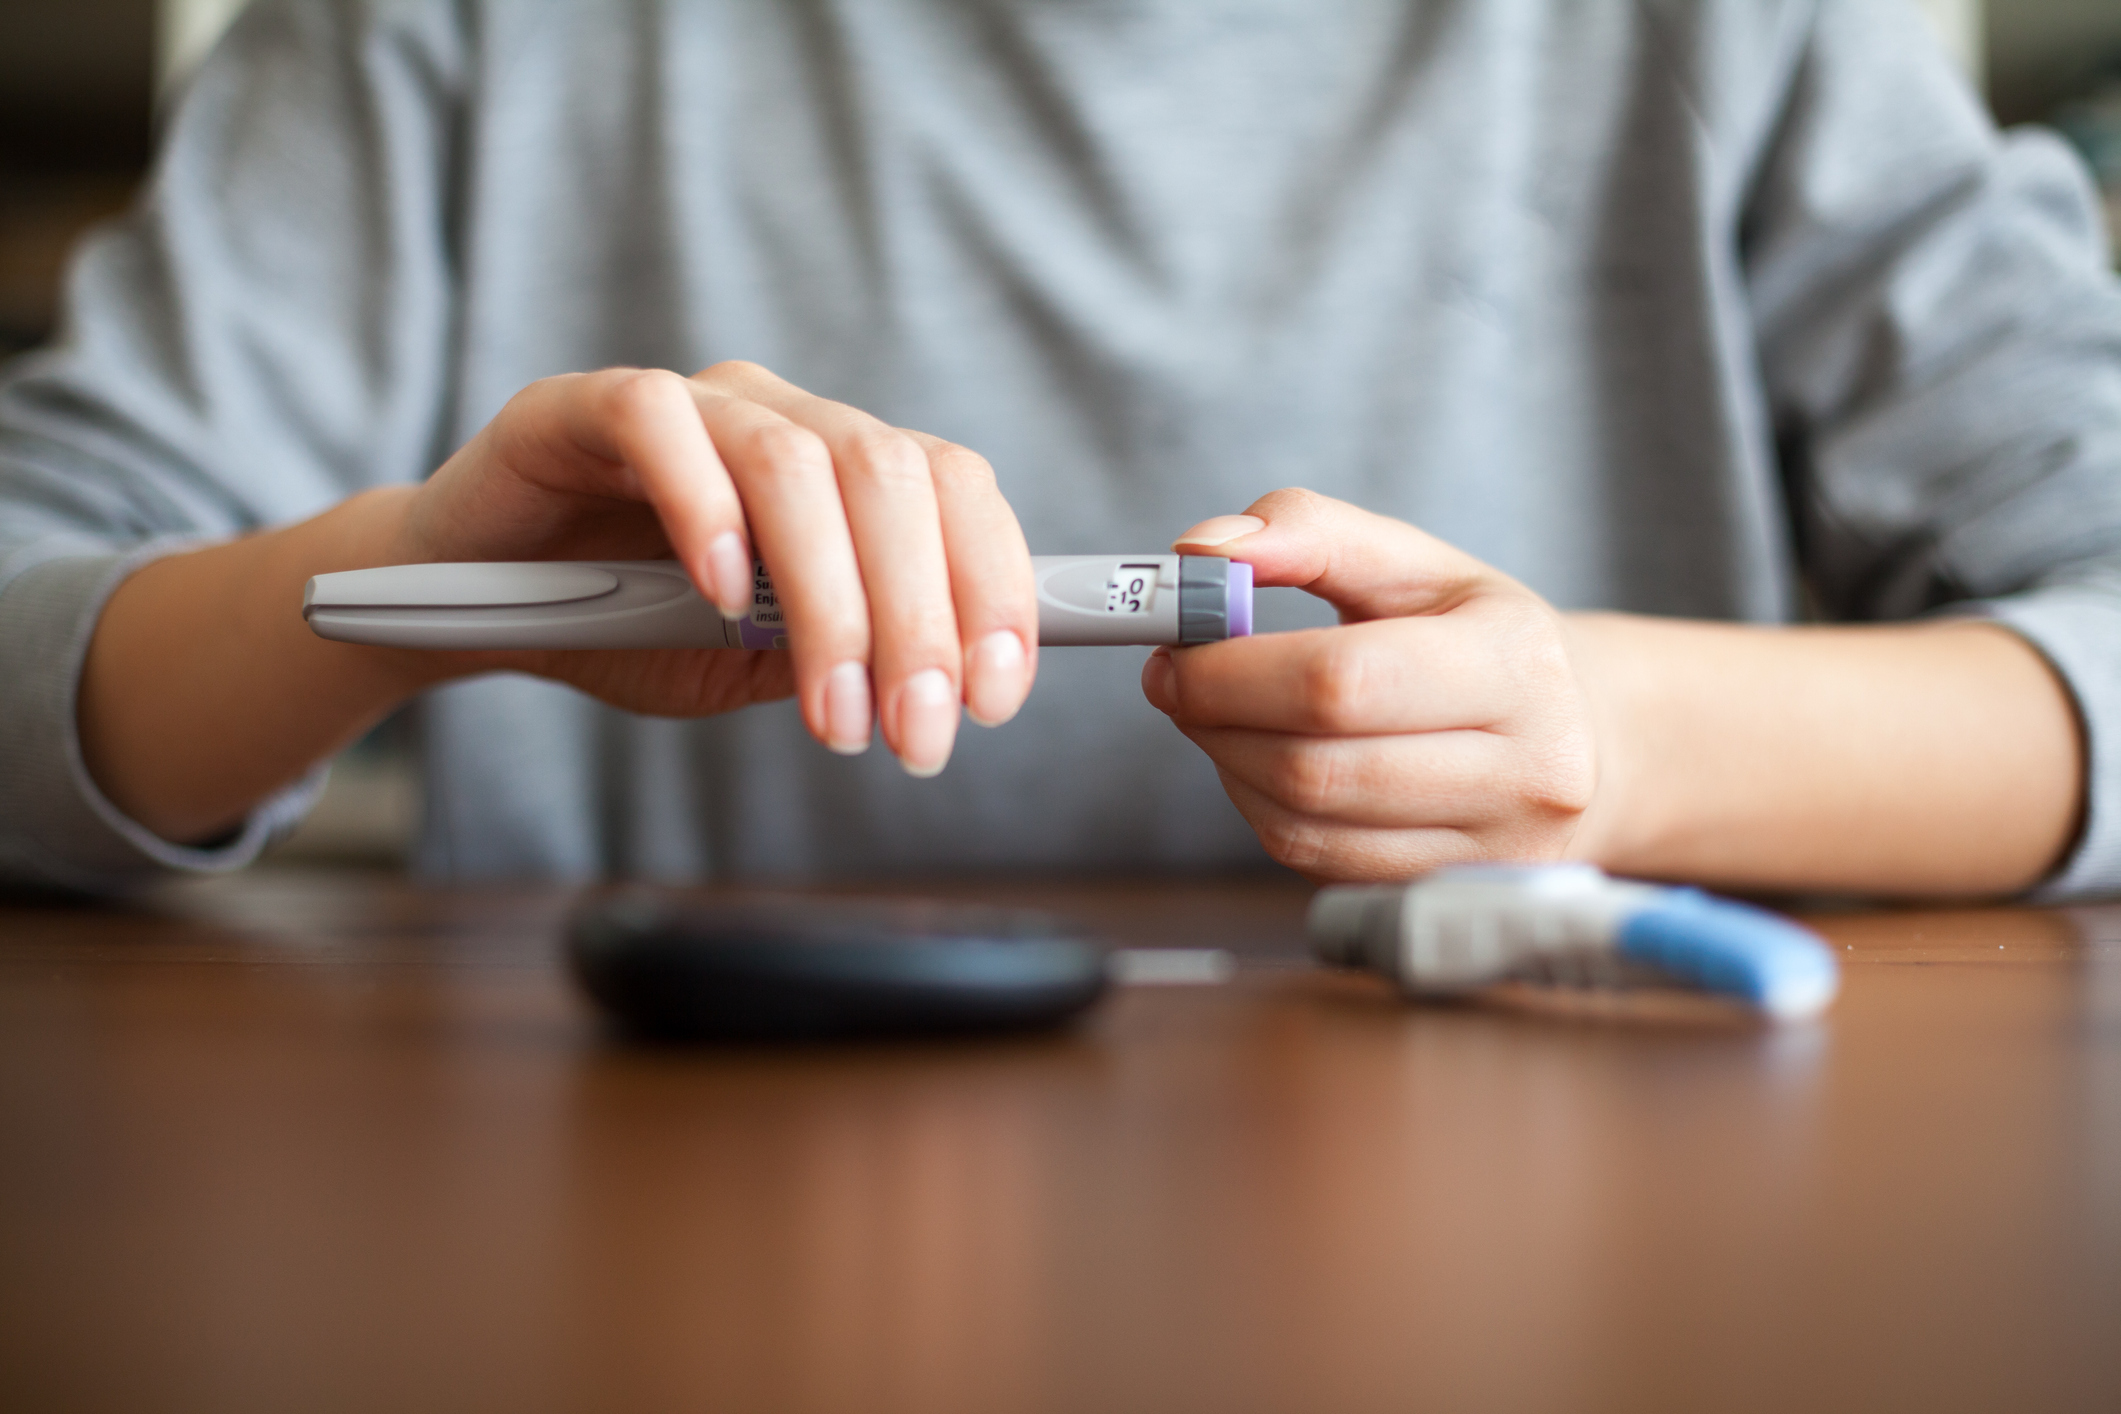 Insulin Delivery Devices: What to Know About Pens & Patches